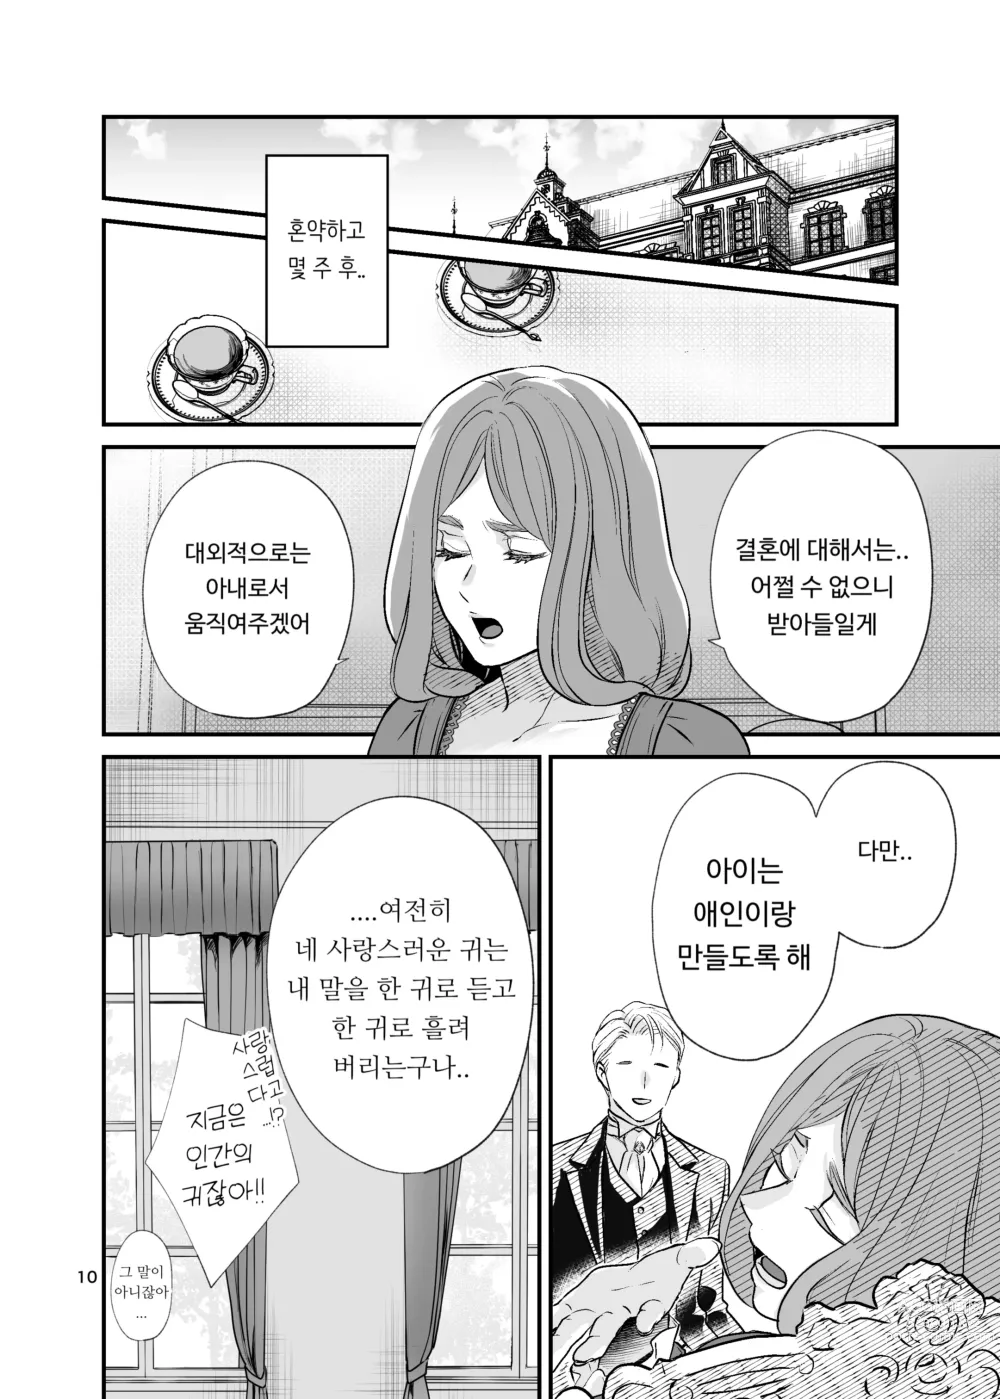 Page 10 of doujinshi 수인 영애와 혼약자